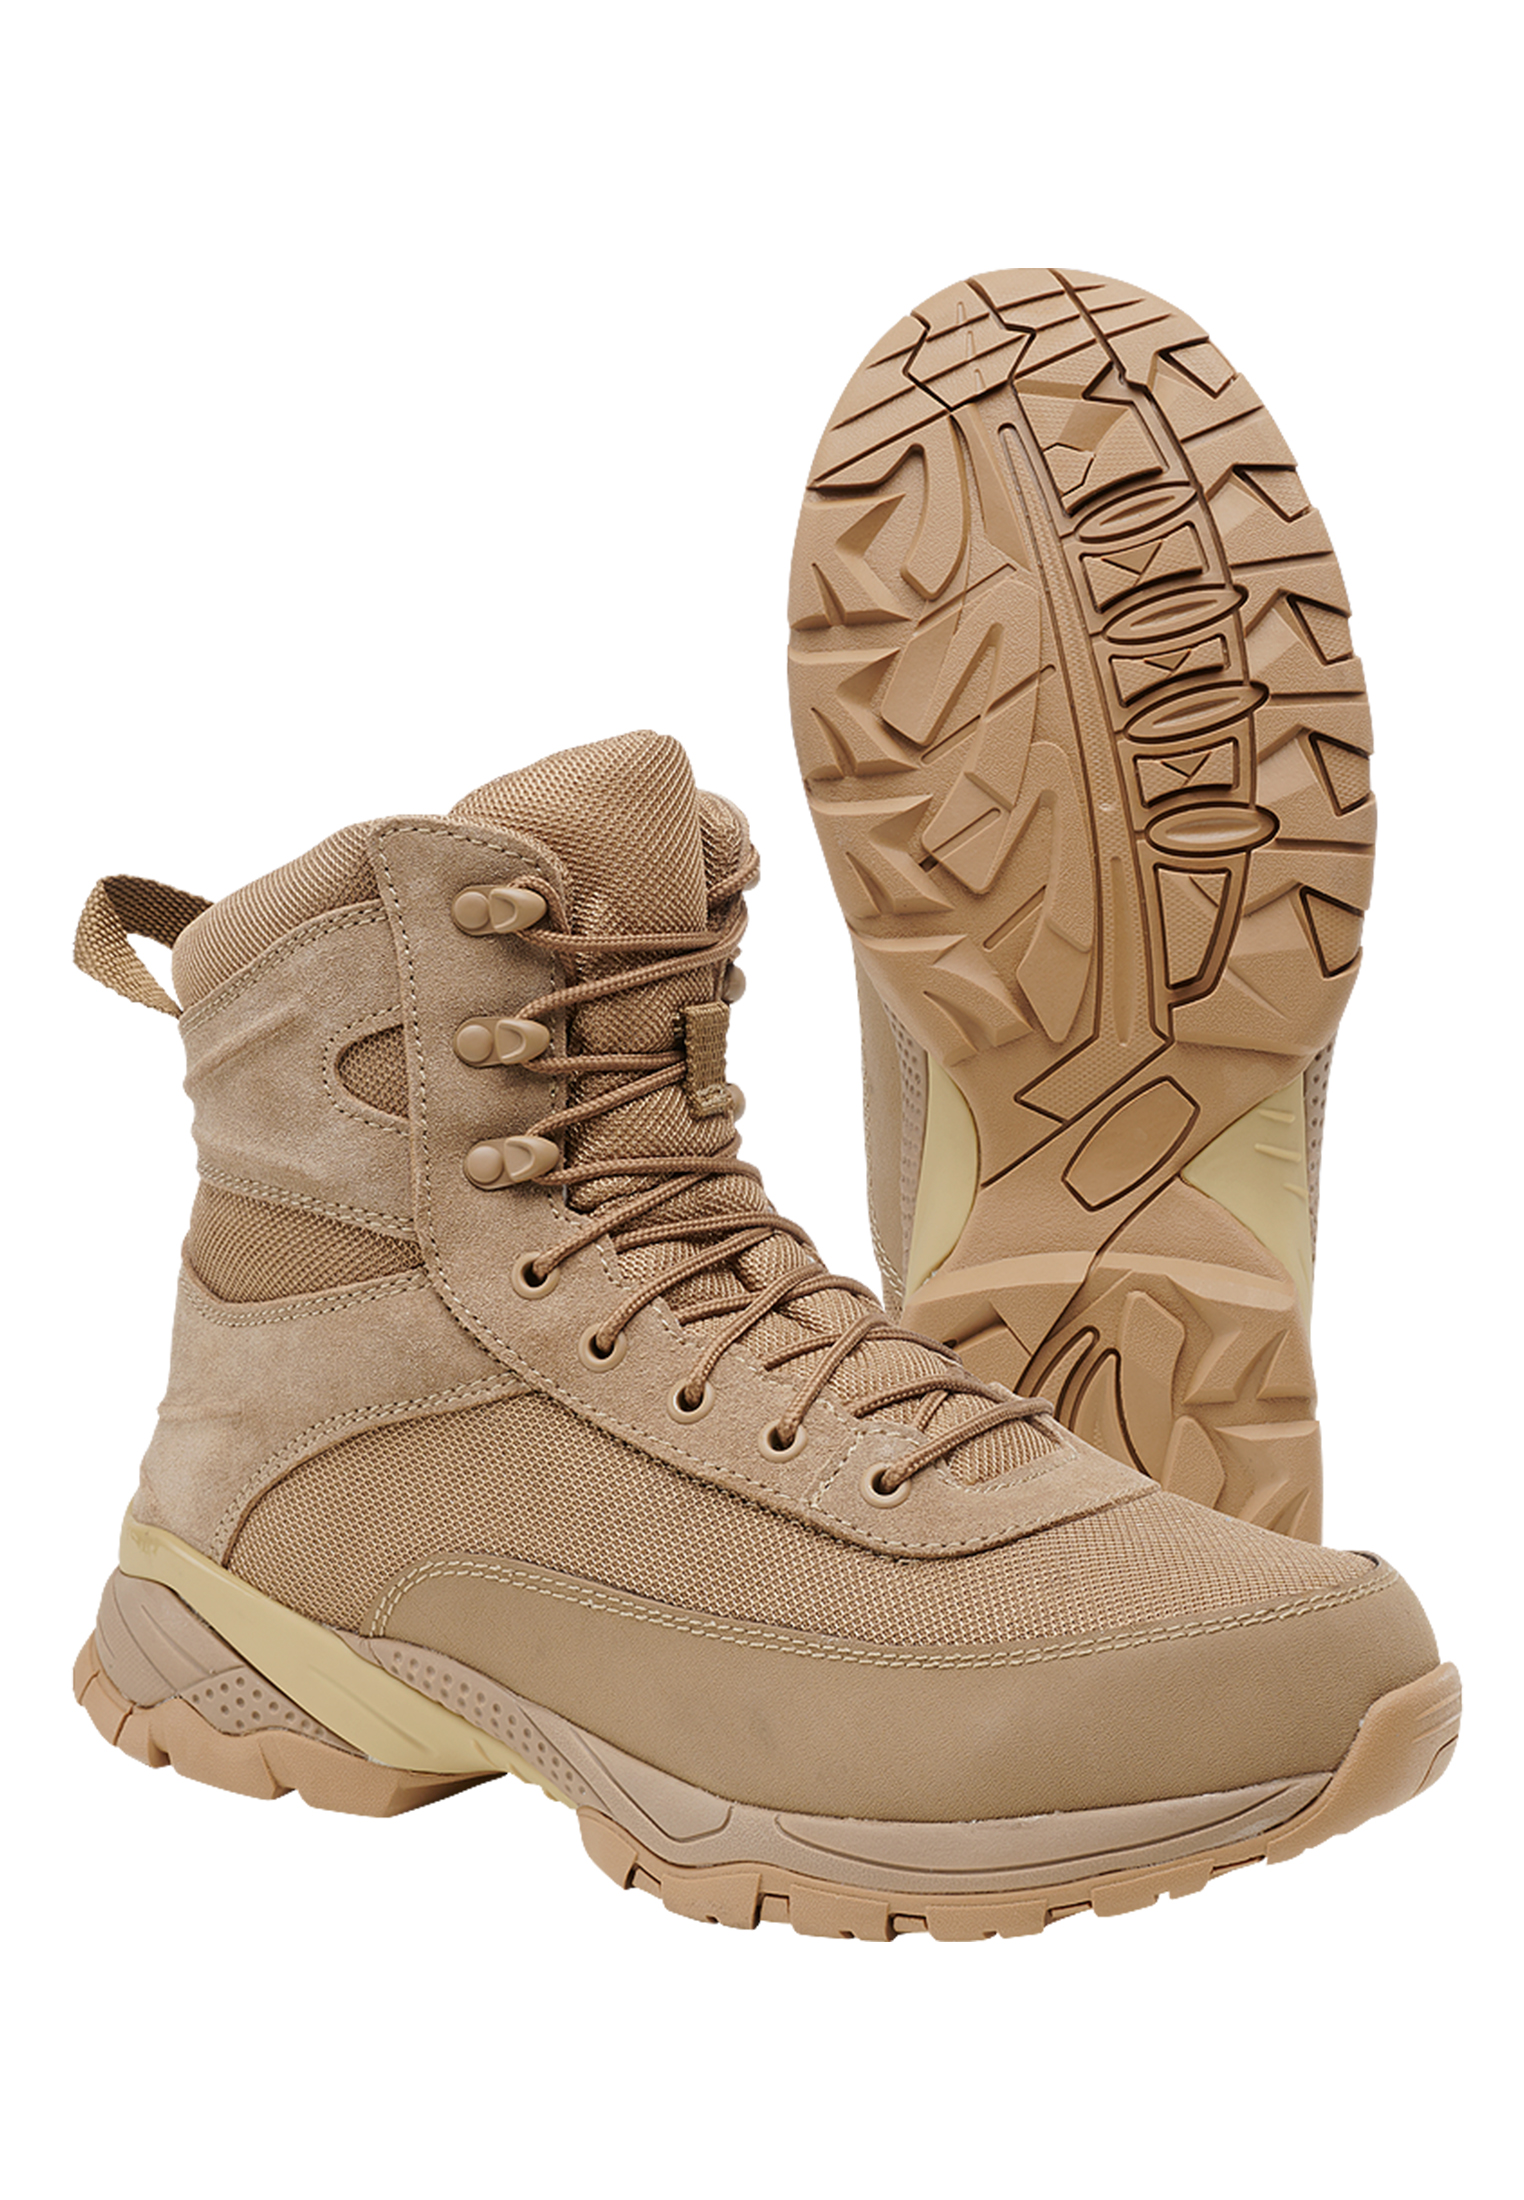 Schuhe Tactical Boot Next Generation in Farbe beige